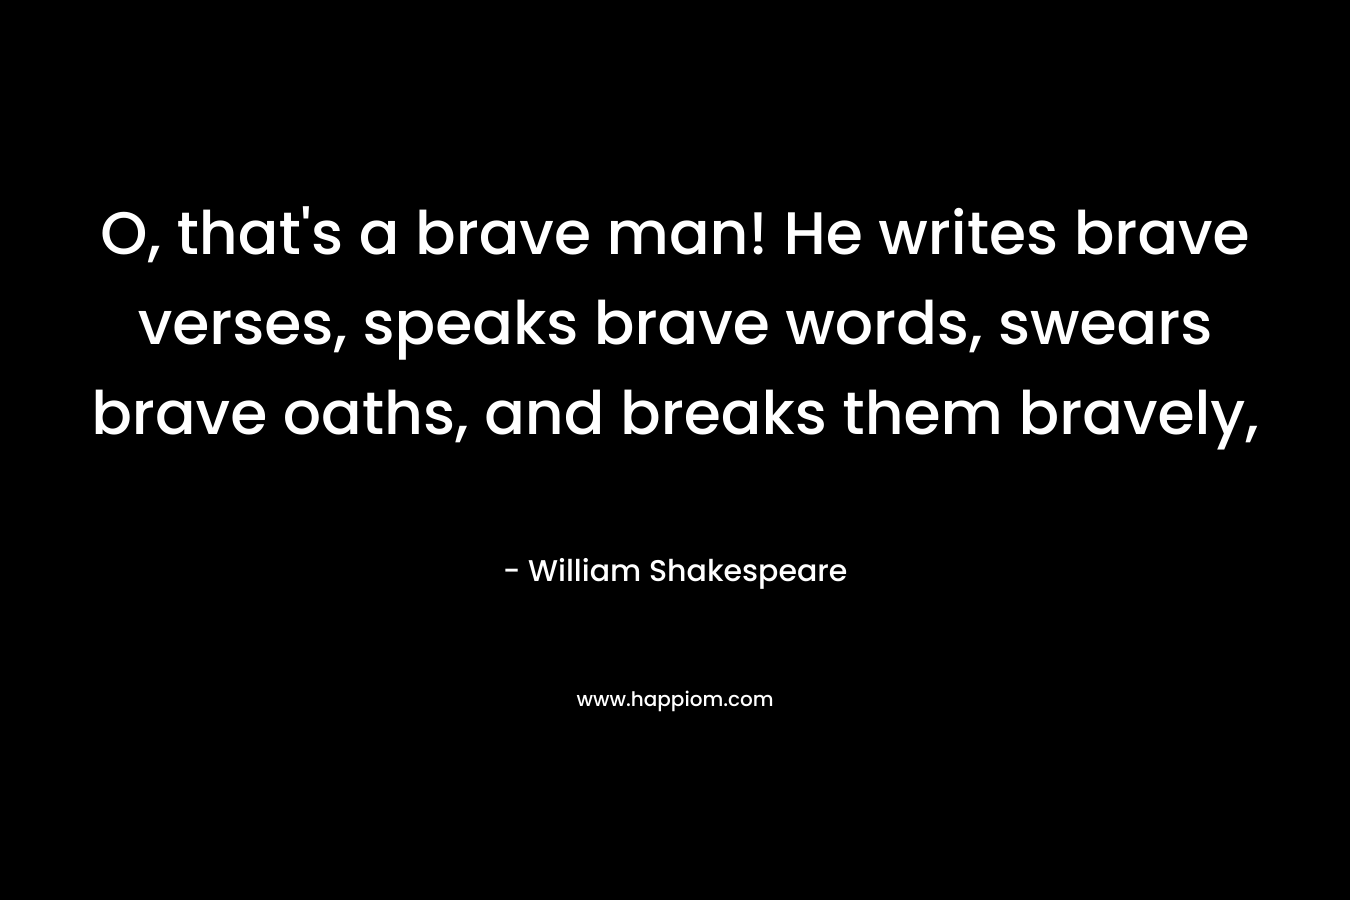 O, that's a brave man! He writes brave verses, speaks brave words, swears brave oaths, and breaks them bravely,